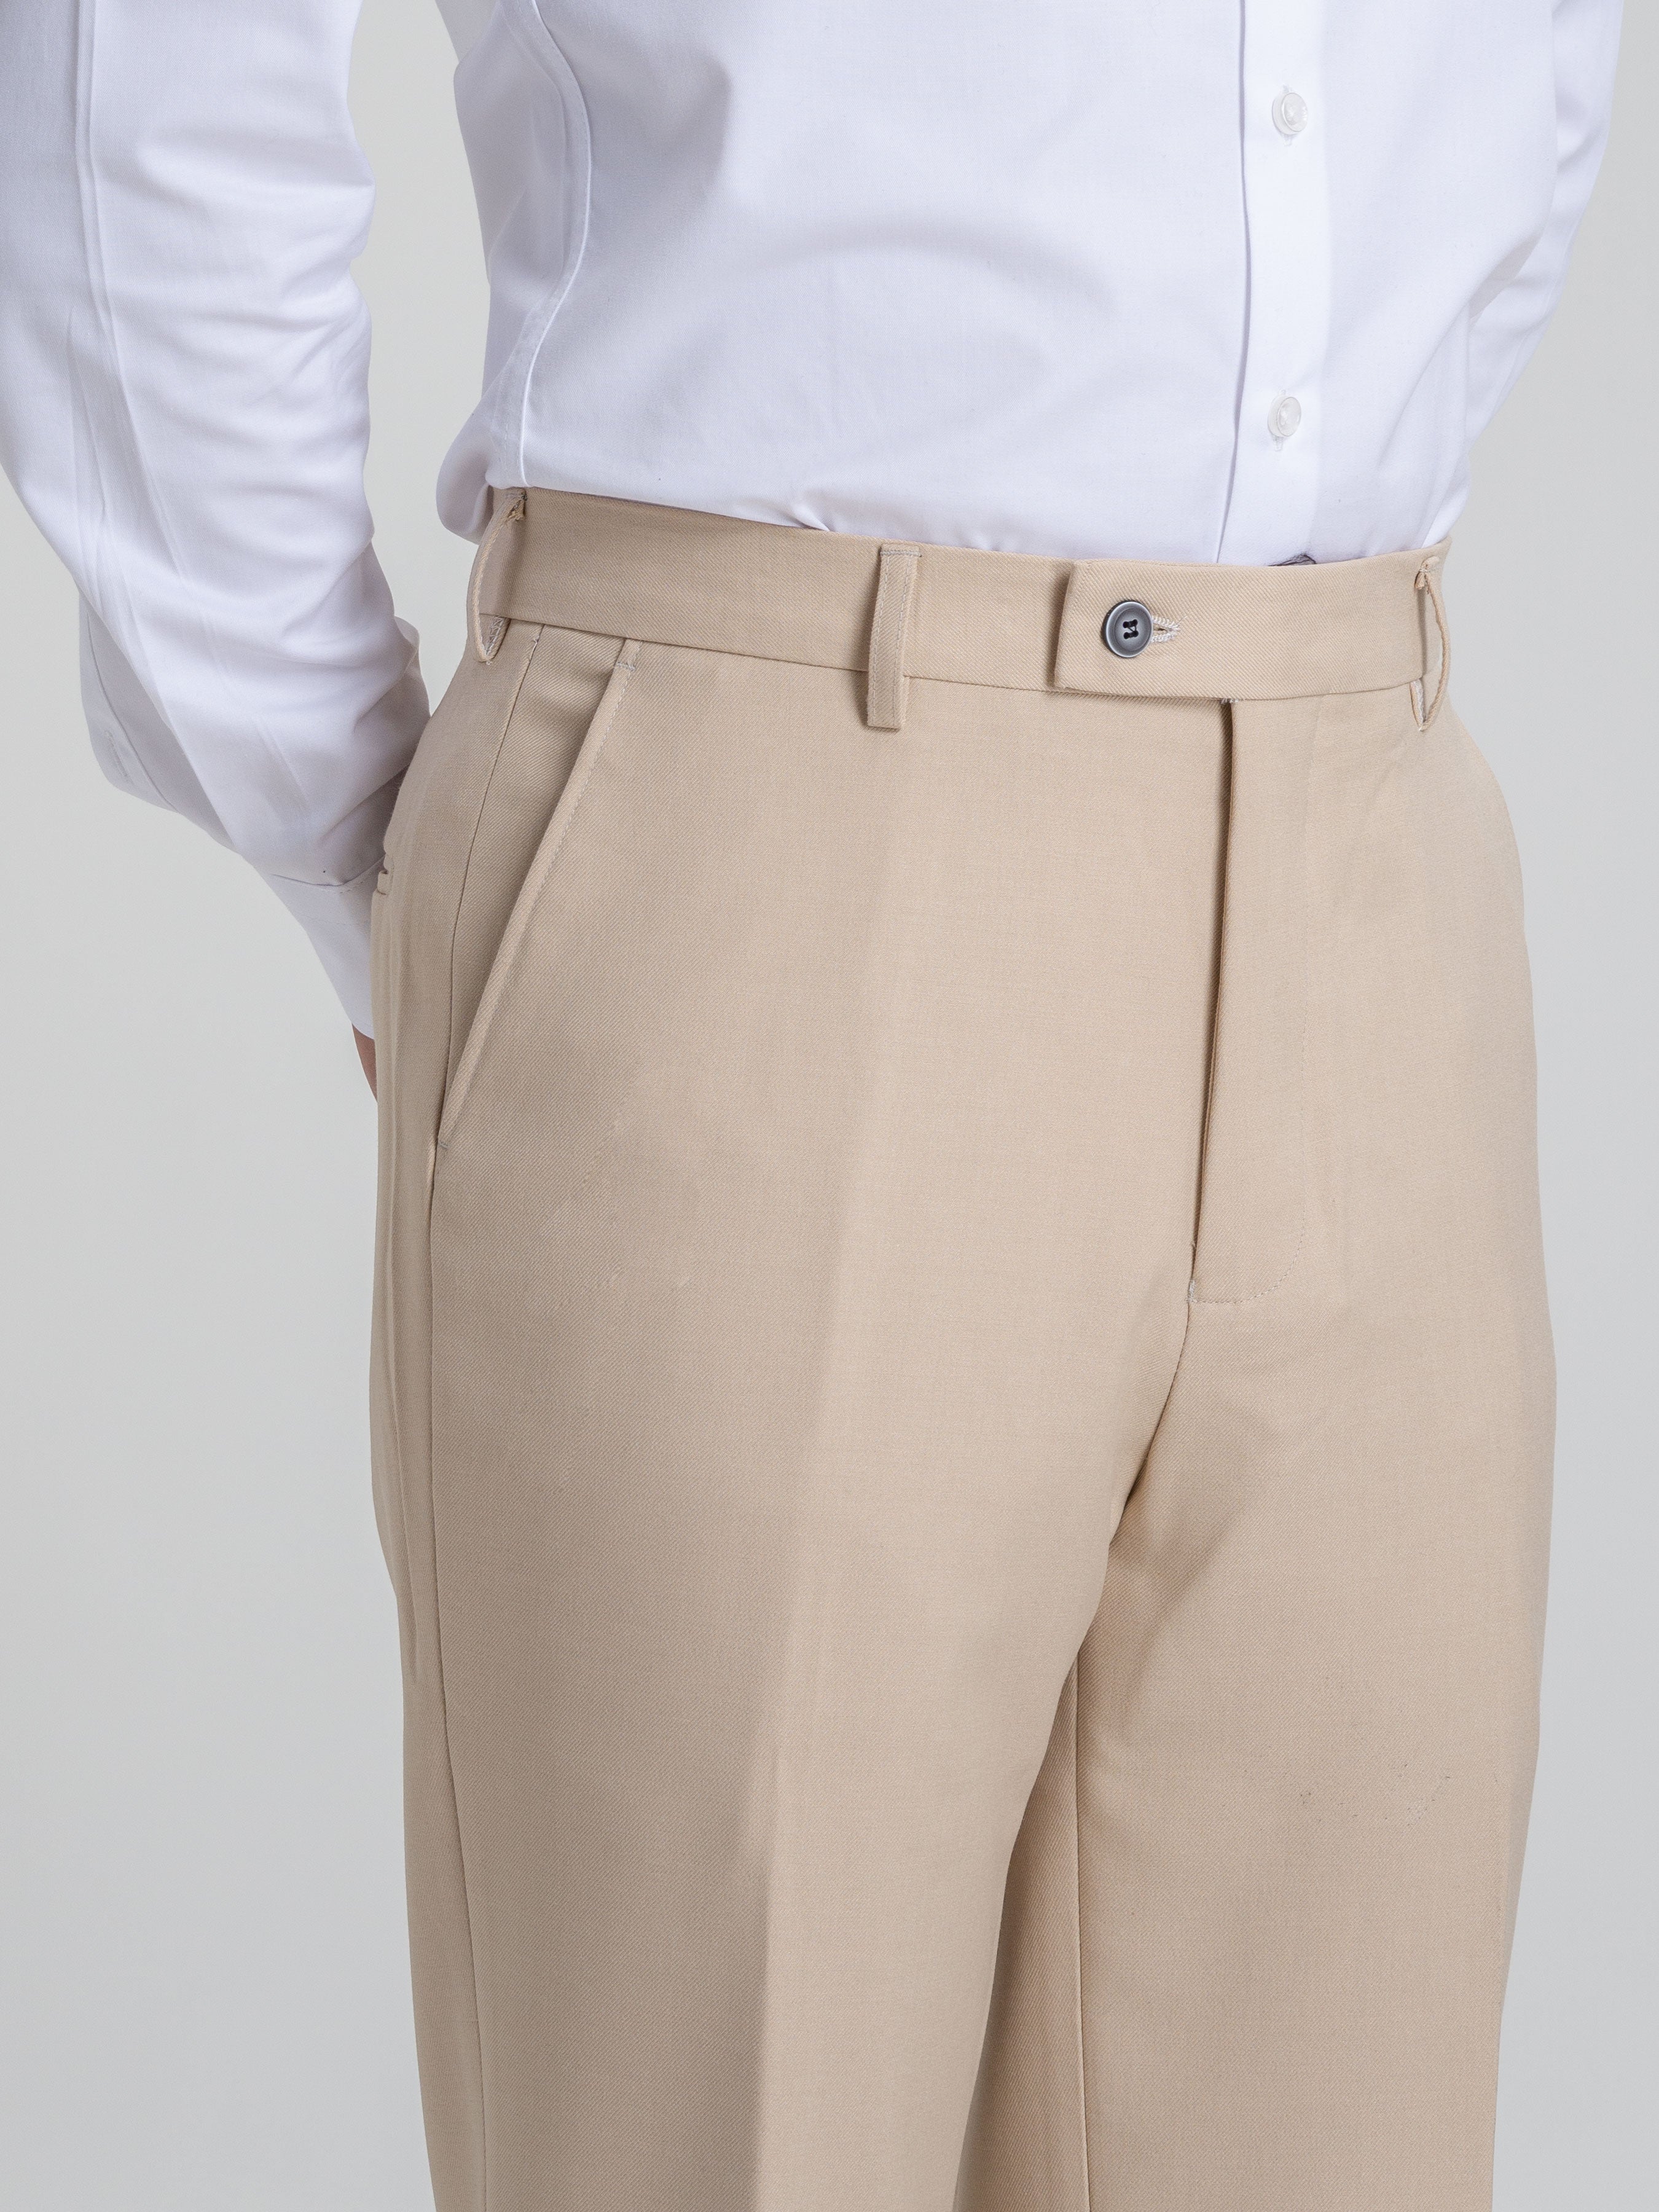 Trousers With Belt Loop - Beige Plain (Stretchable) - Zeve Shoes